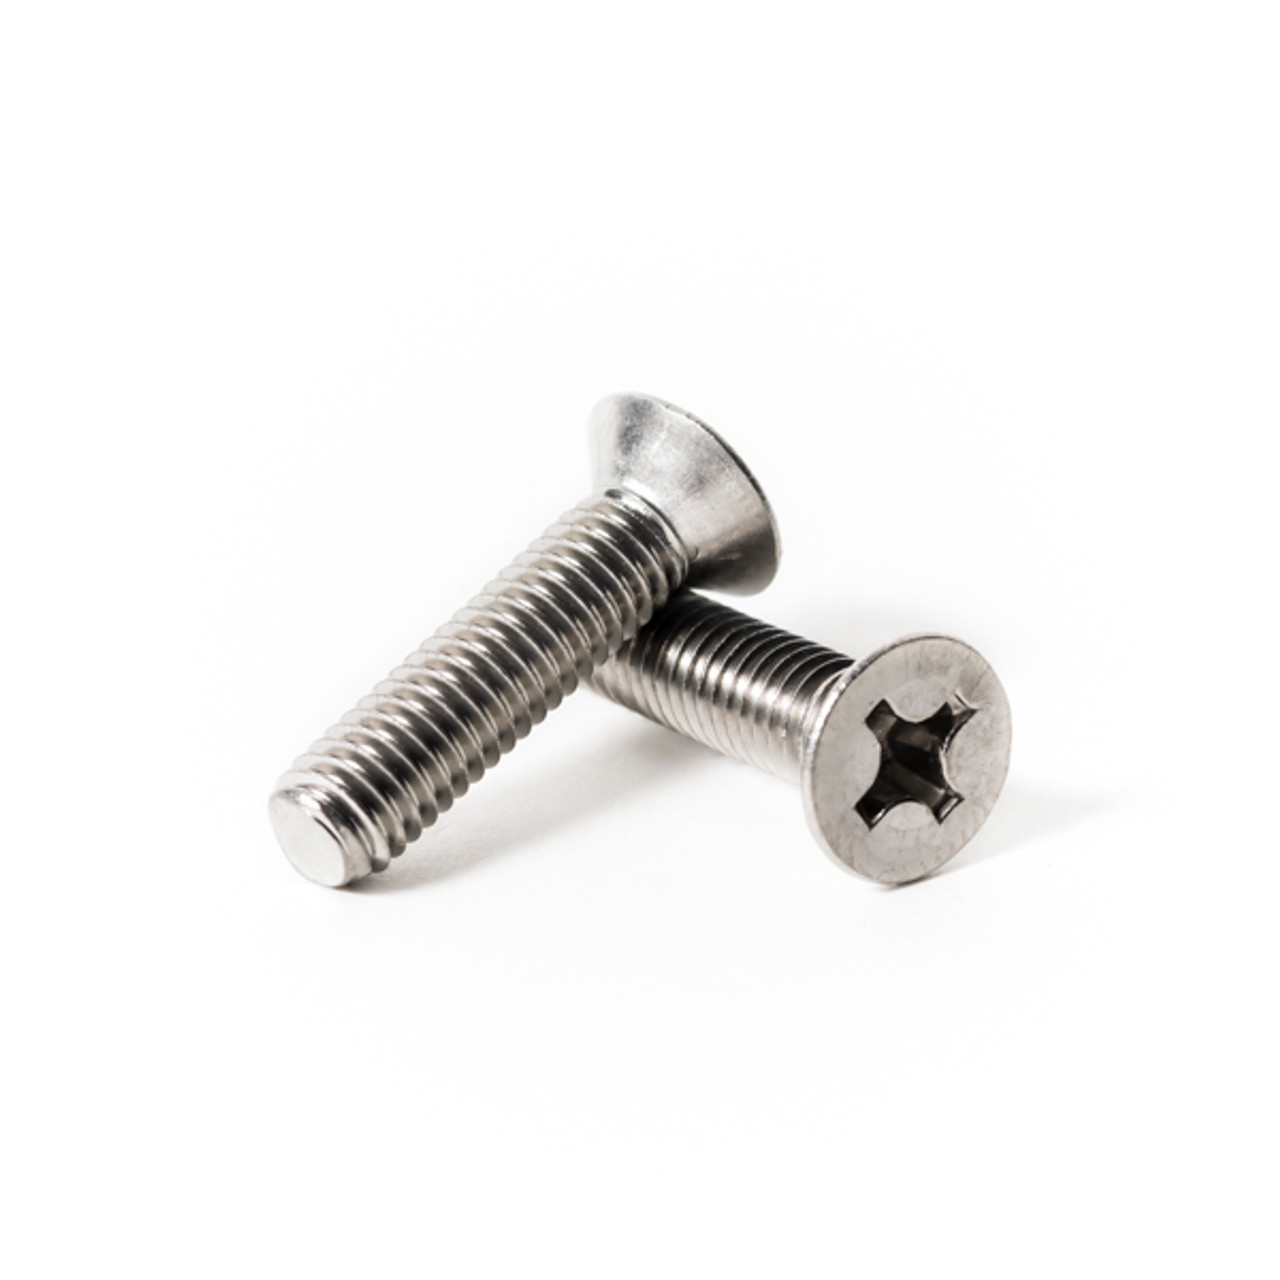 M2 Stainless Phillips Countersunk Flat Head Self Tapping Sheet Metal Wood Screws 